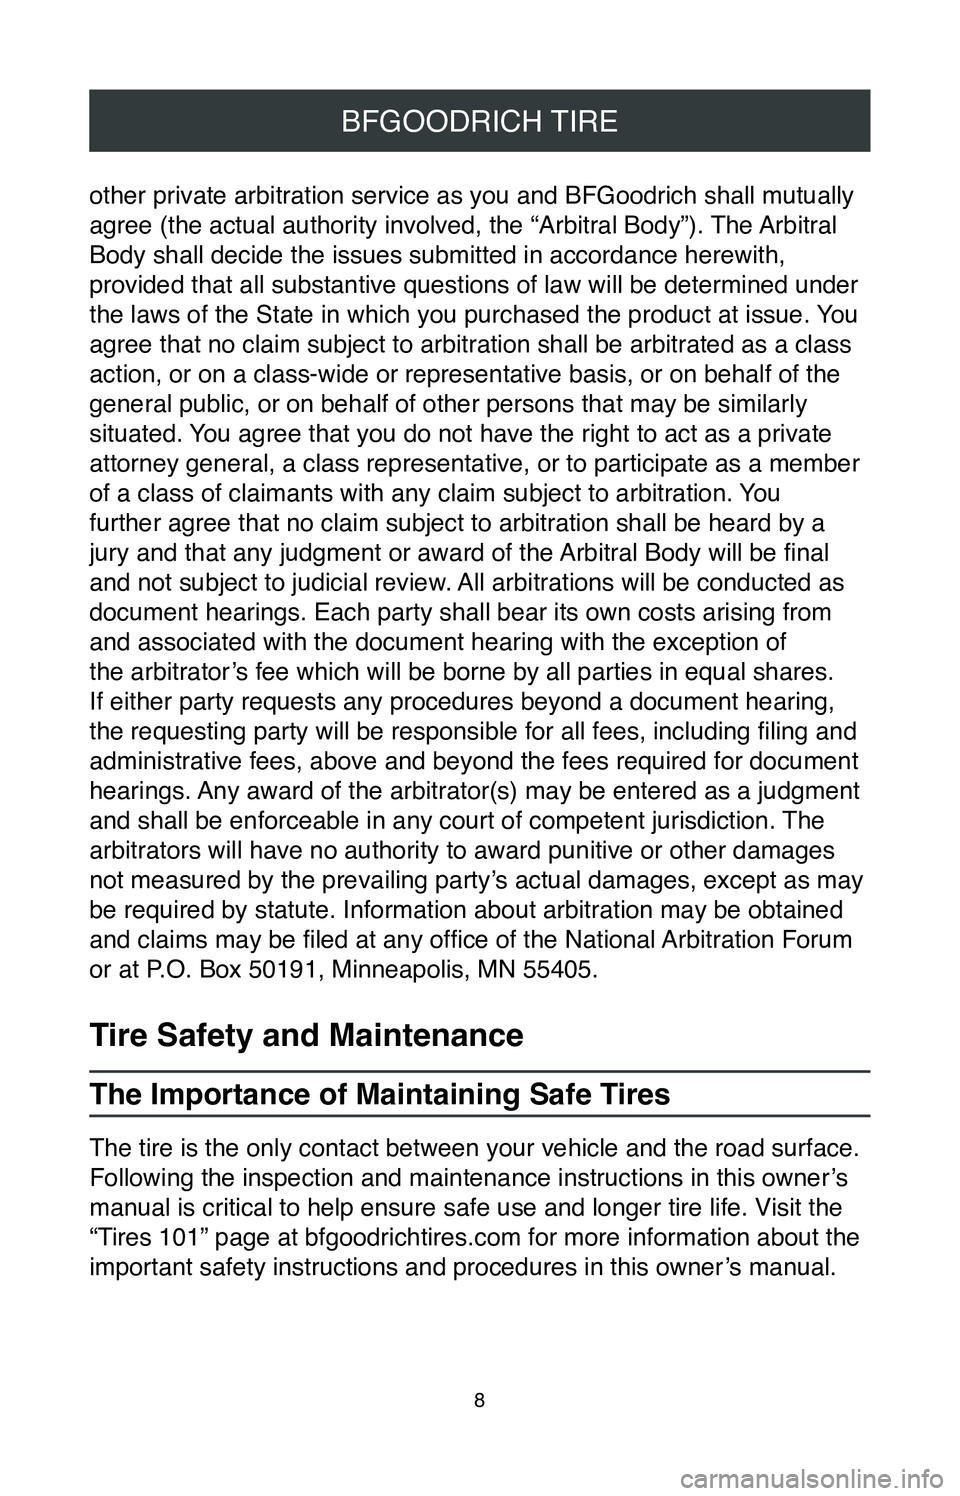 TOYOTA CAMRY HYBRID 2020  Warranties & Maintenance Guides (in English) 8
BFGOODRICH TIRE
other private arbitration service as you and BFGoodrich shall mutually 
agree (the actual authority involved, the “Arbitral Body”). The Arbitral 
Body shall decide the issues sub